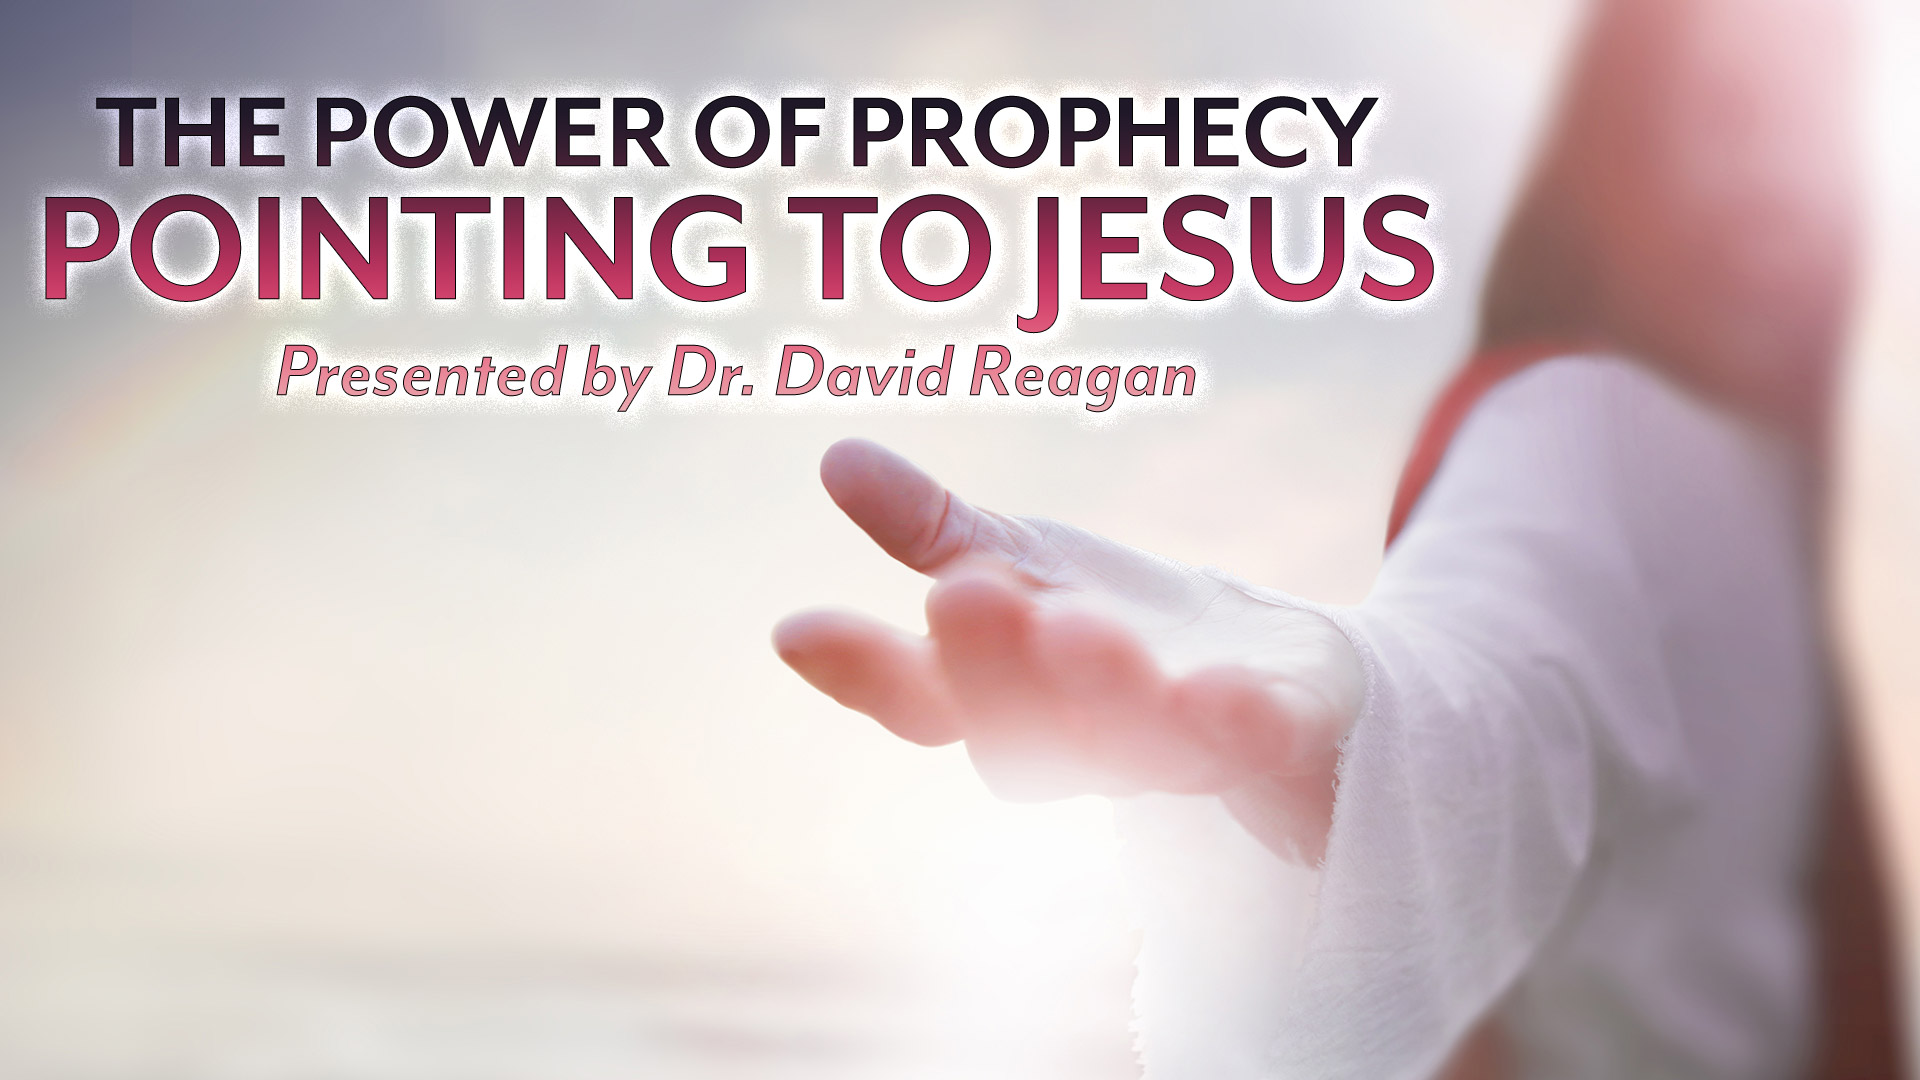 The Power of Prophecy Pointing to Jesus